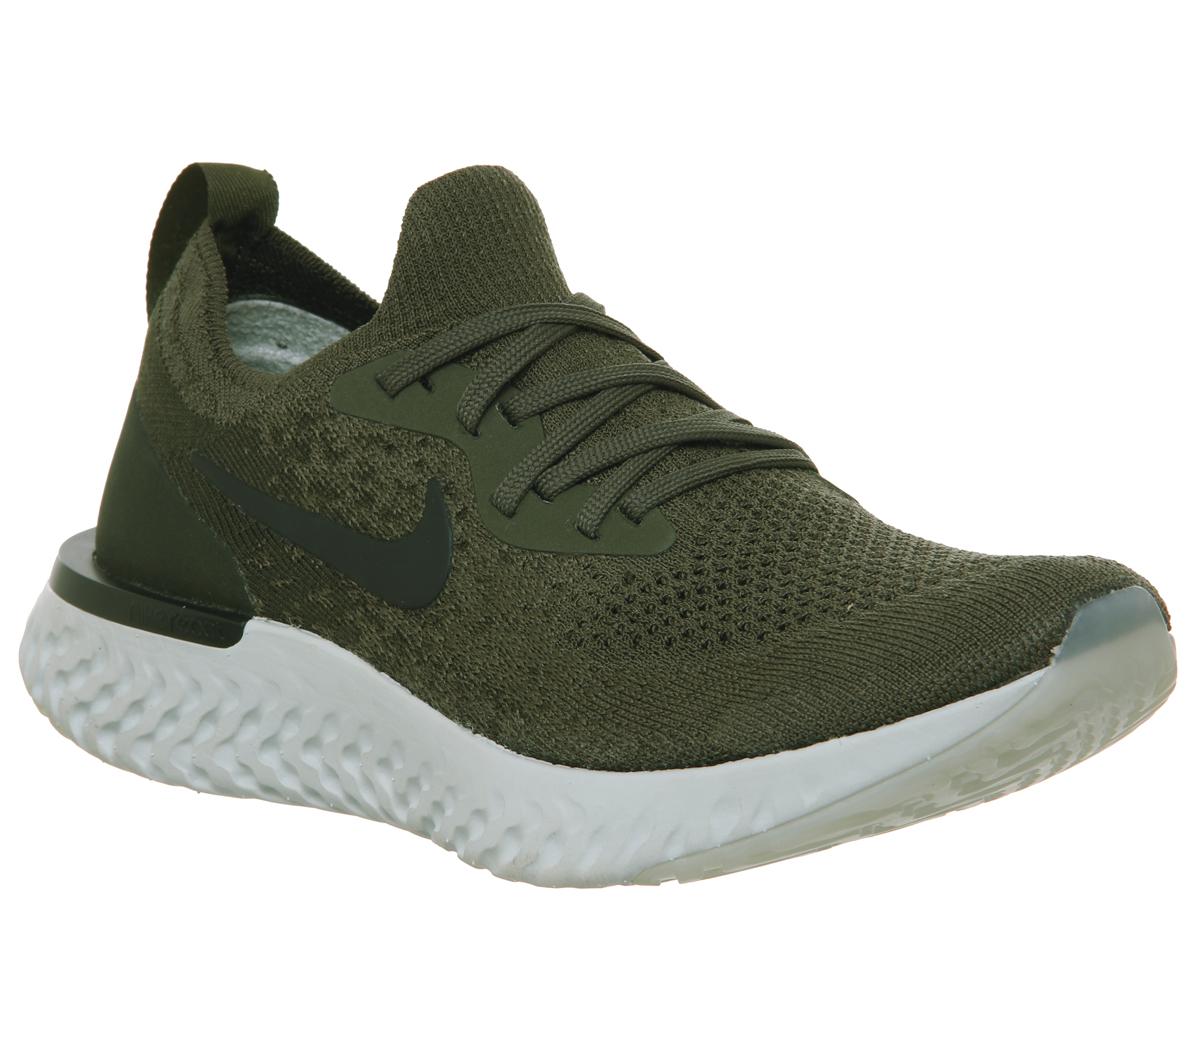 Nike Epic React Flyknit Trainers Cargo 